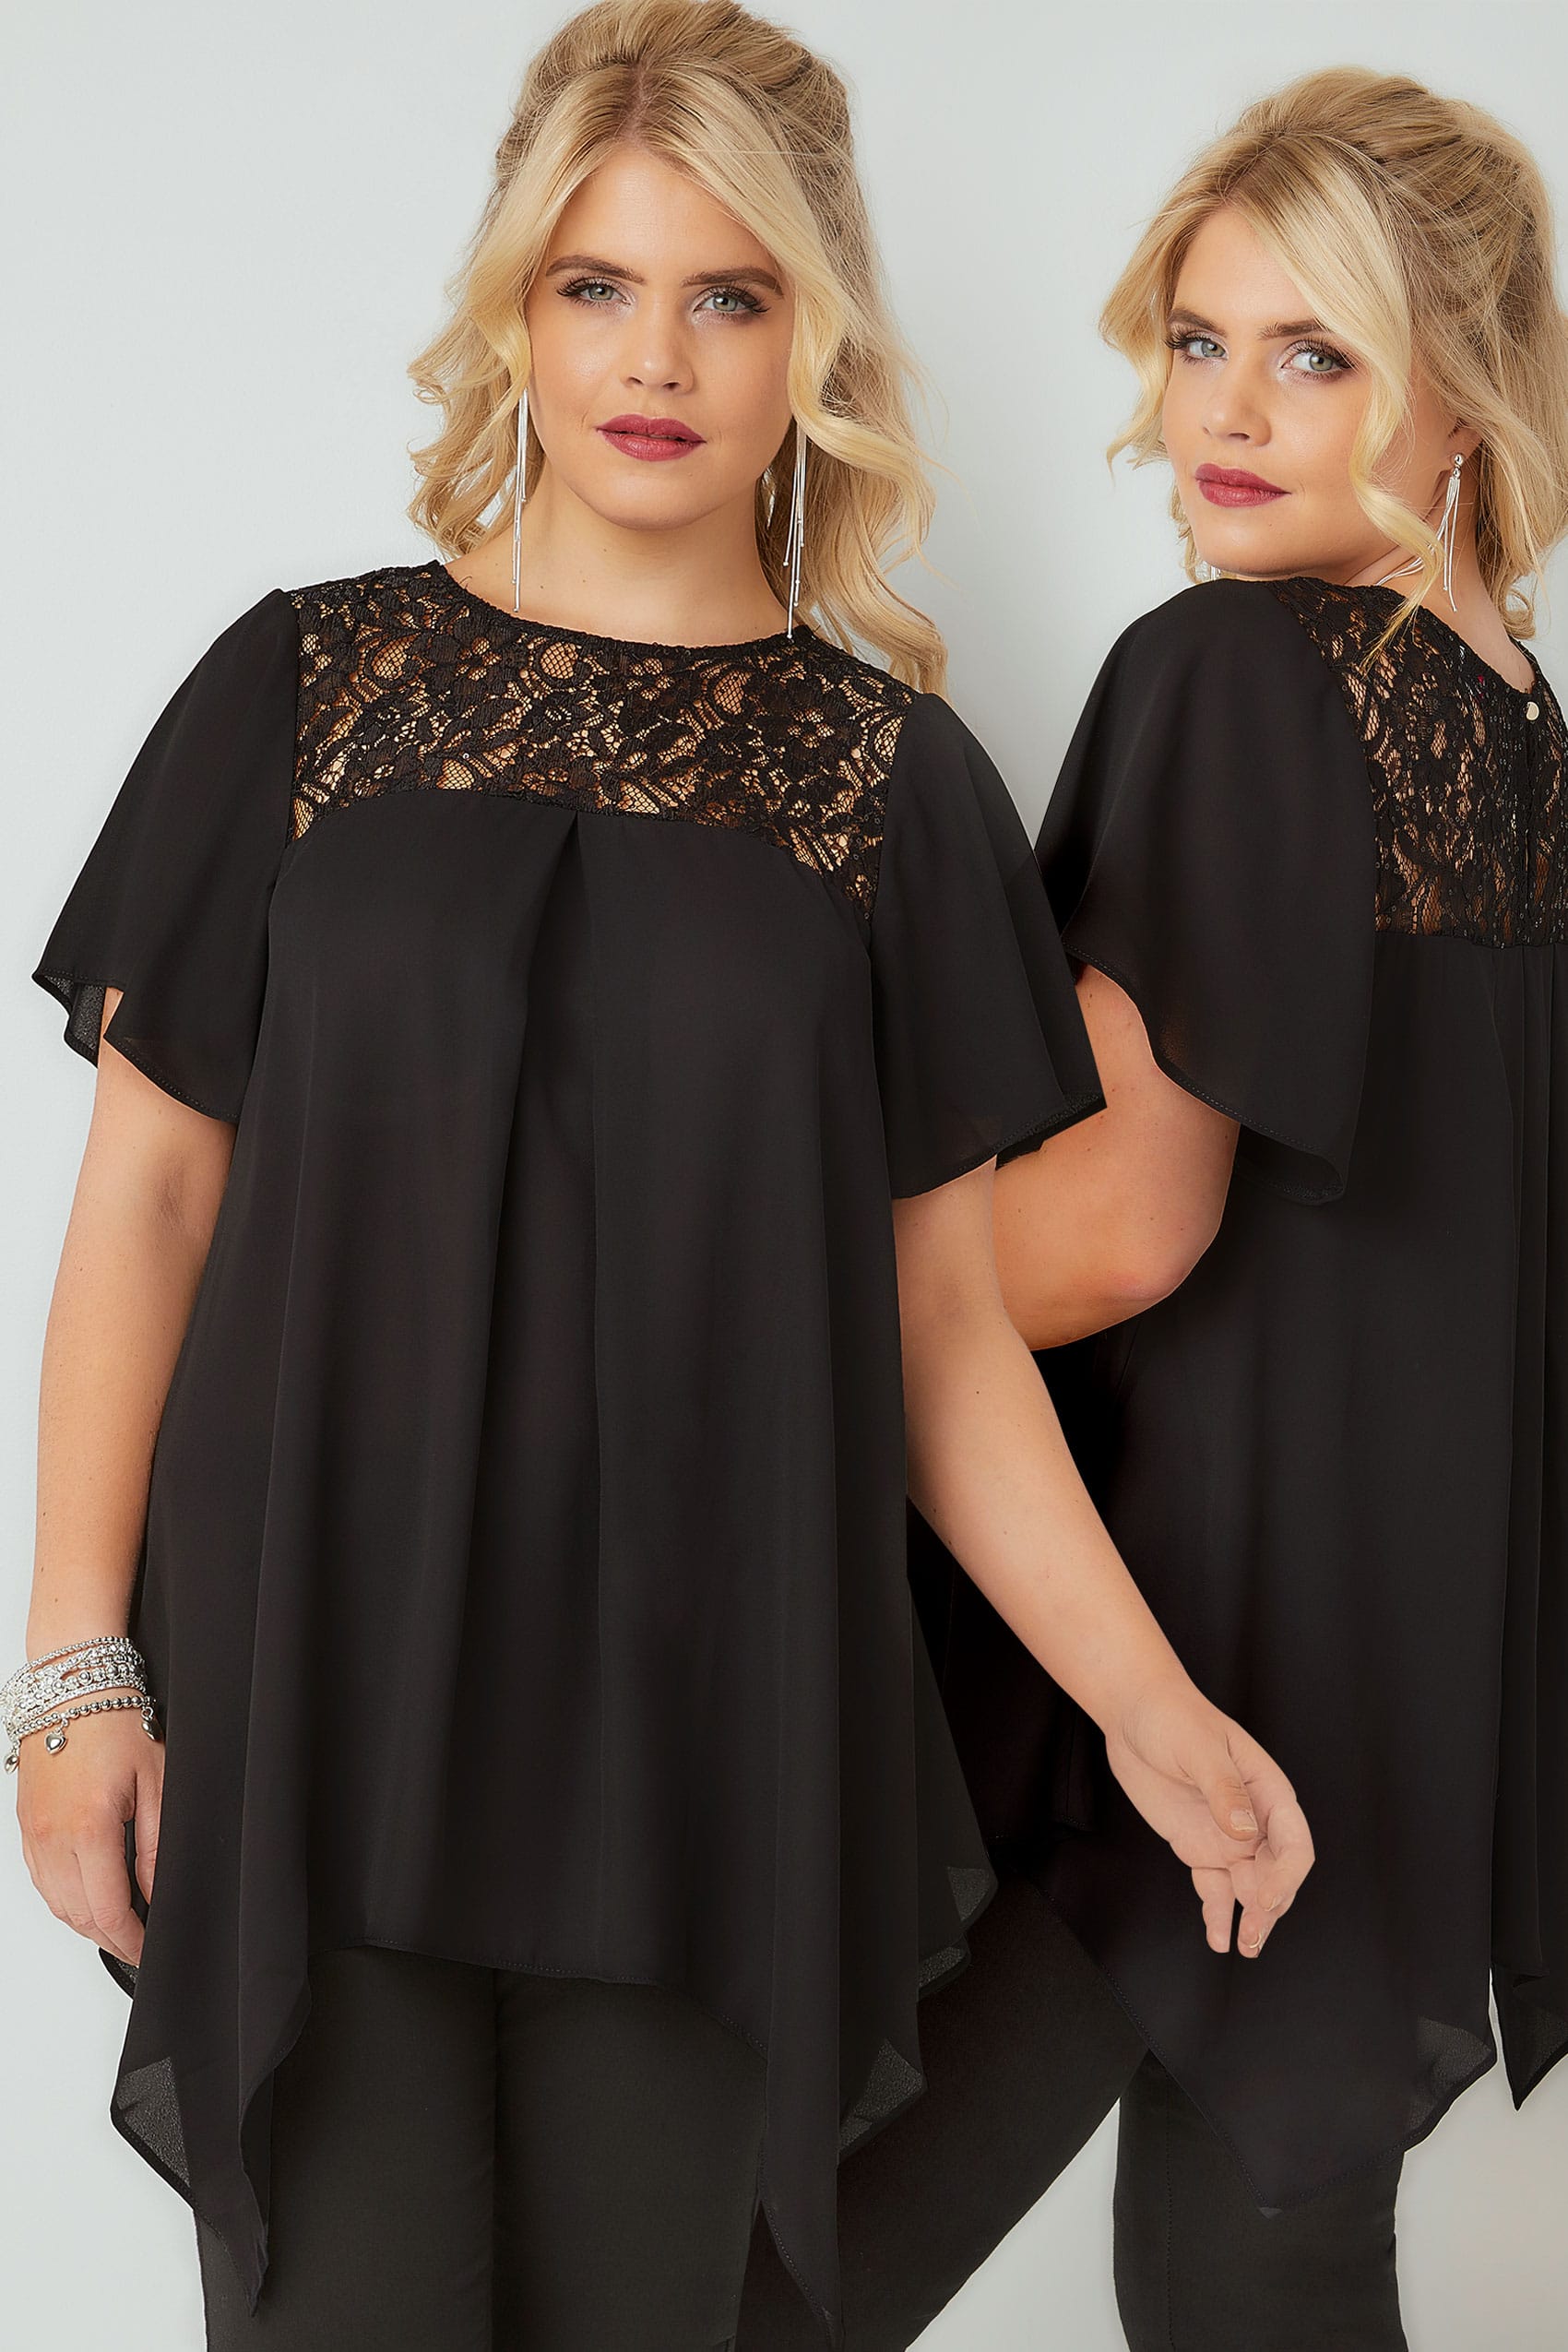 Black Blouse With Lace Sequin Yoke, Plus size 16 to 32